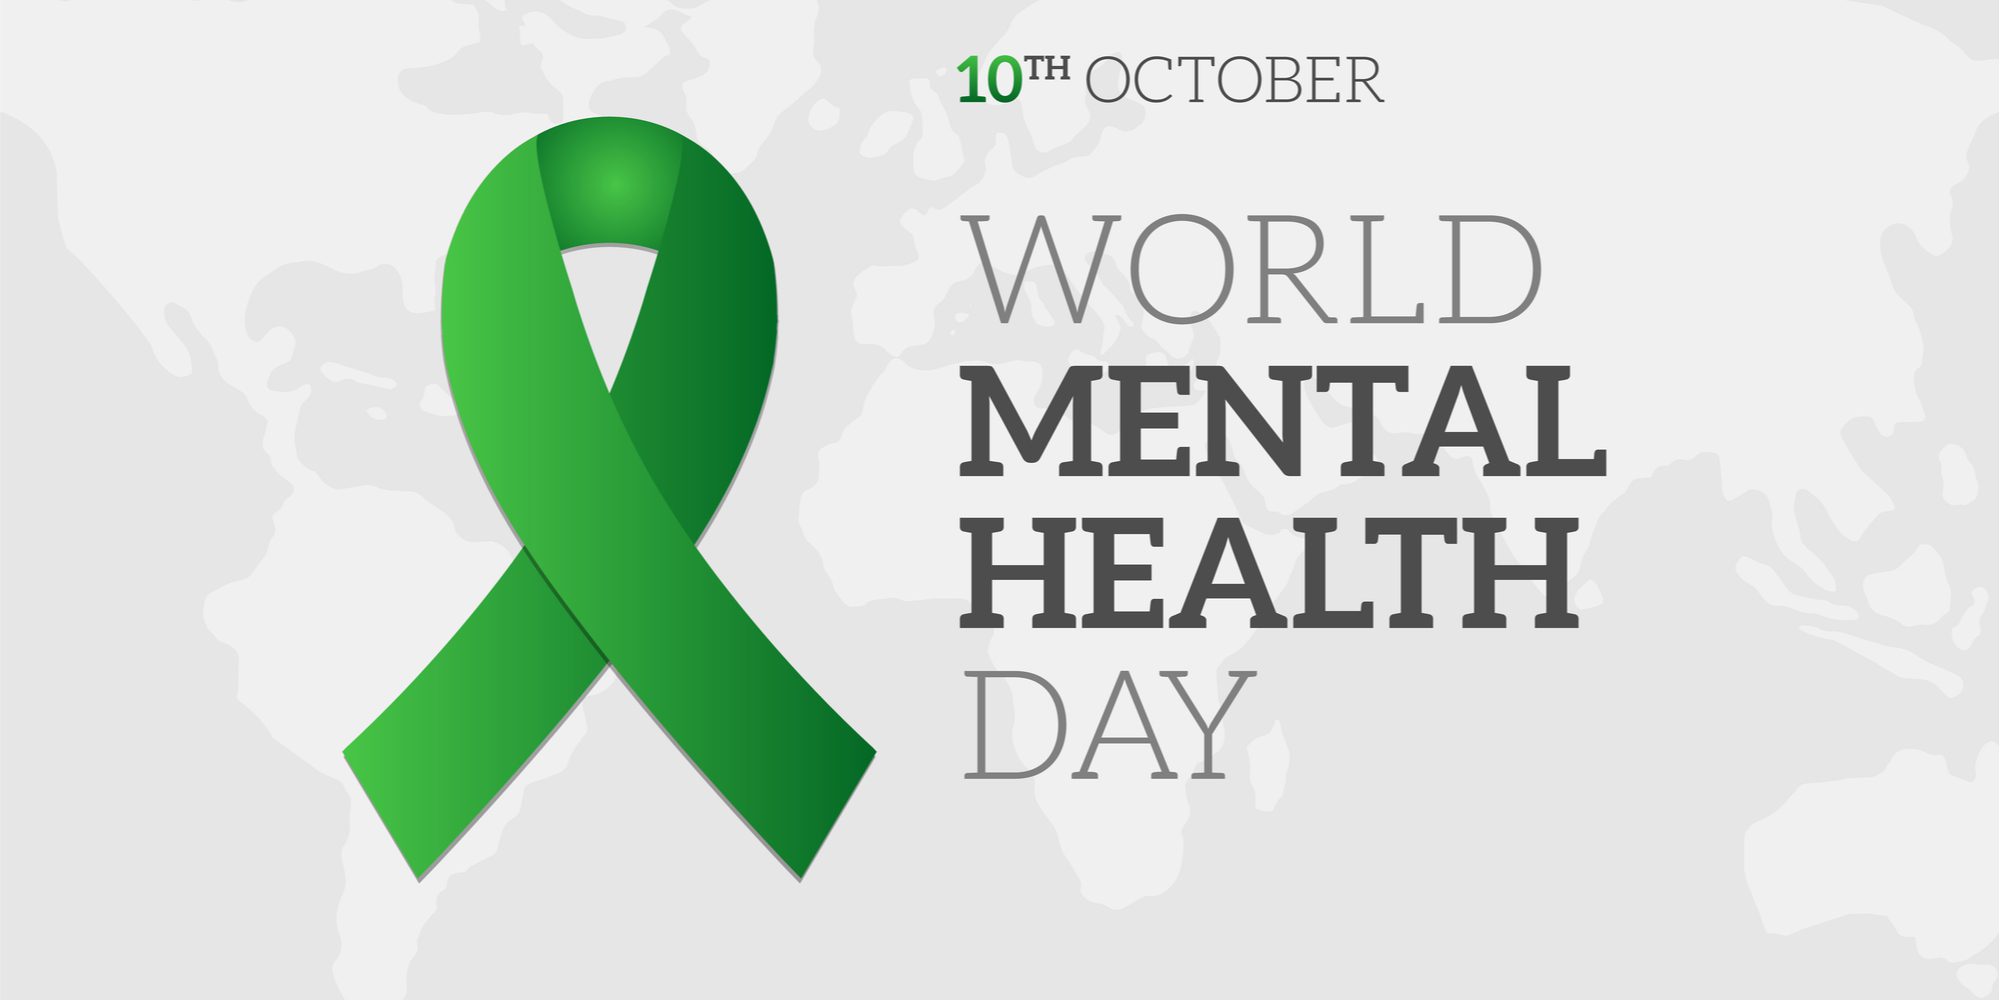 LifeScape Recovery Mental Health Services Mental Health Day October 10th